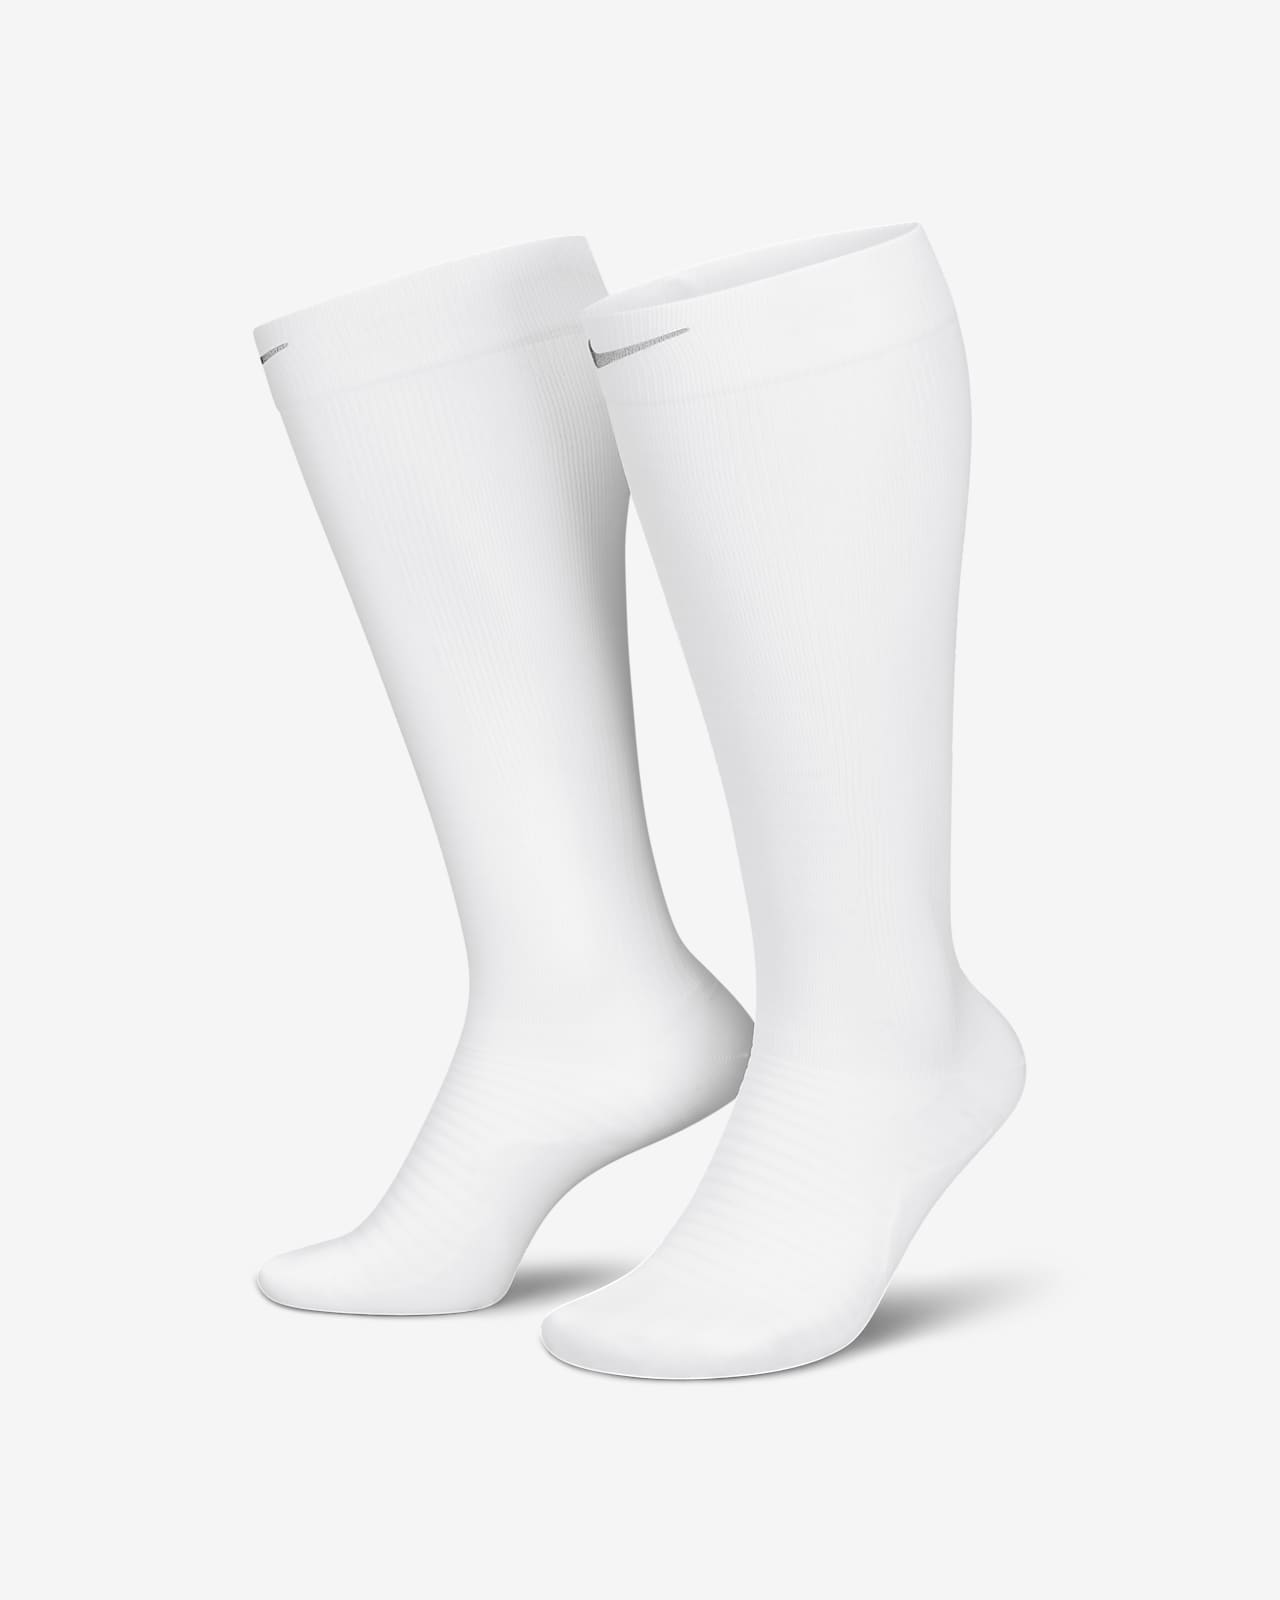 Nike Spark Lightweight Over-The-Calf Compression Calcetines de running